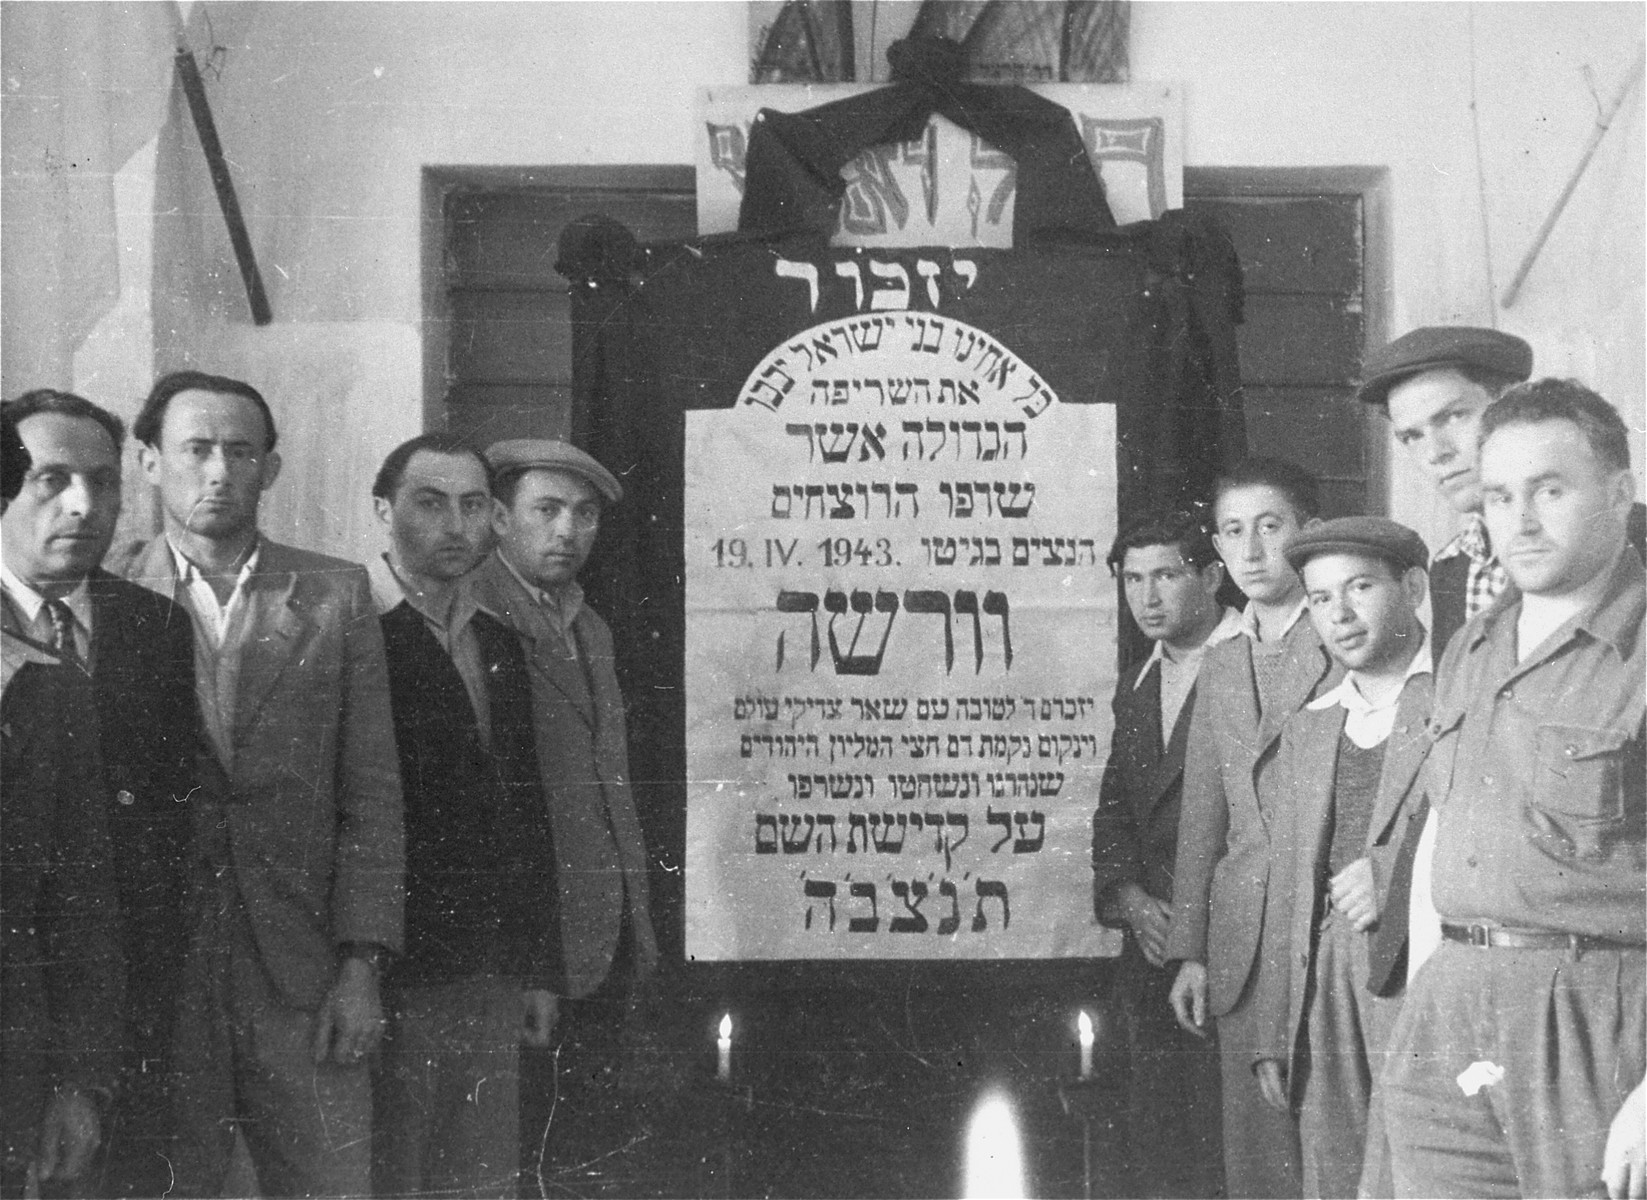 Jewish DPs in Cremona, Italy, gather around a plaque memorializing Jews who were killed by the Nazis during the suppression of the Warsaw ghetto uprising.

Among those pictured (fourth from the left) is Szepsel Kaftanski (later Seymore Kaftan).